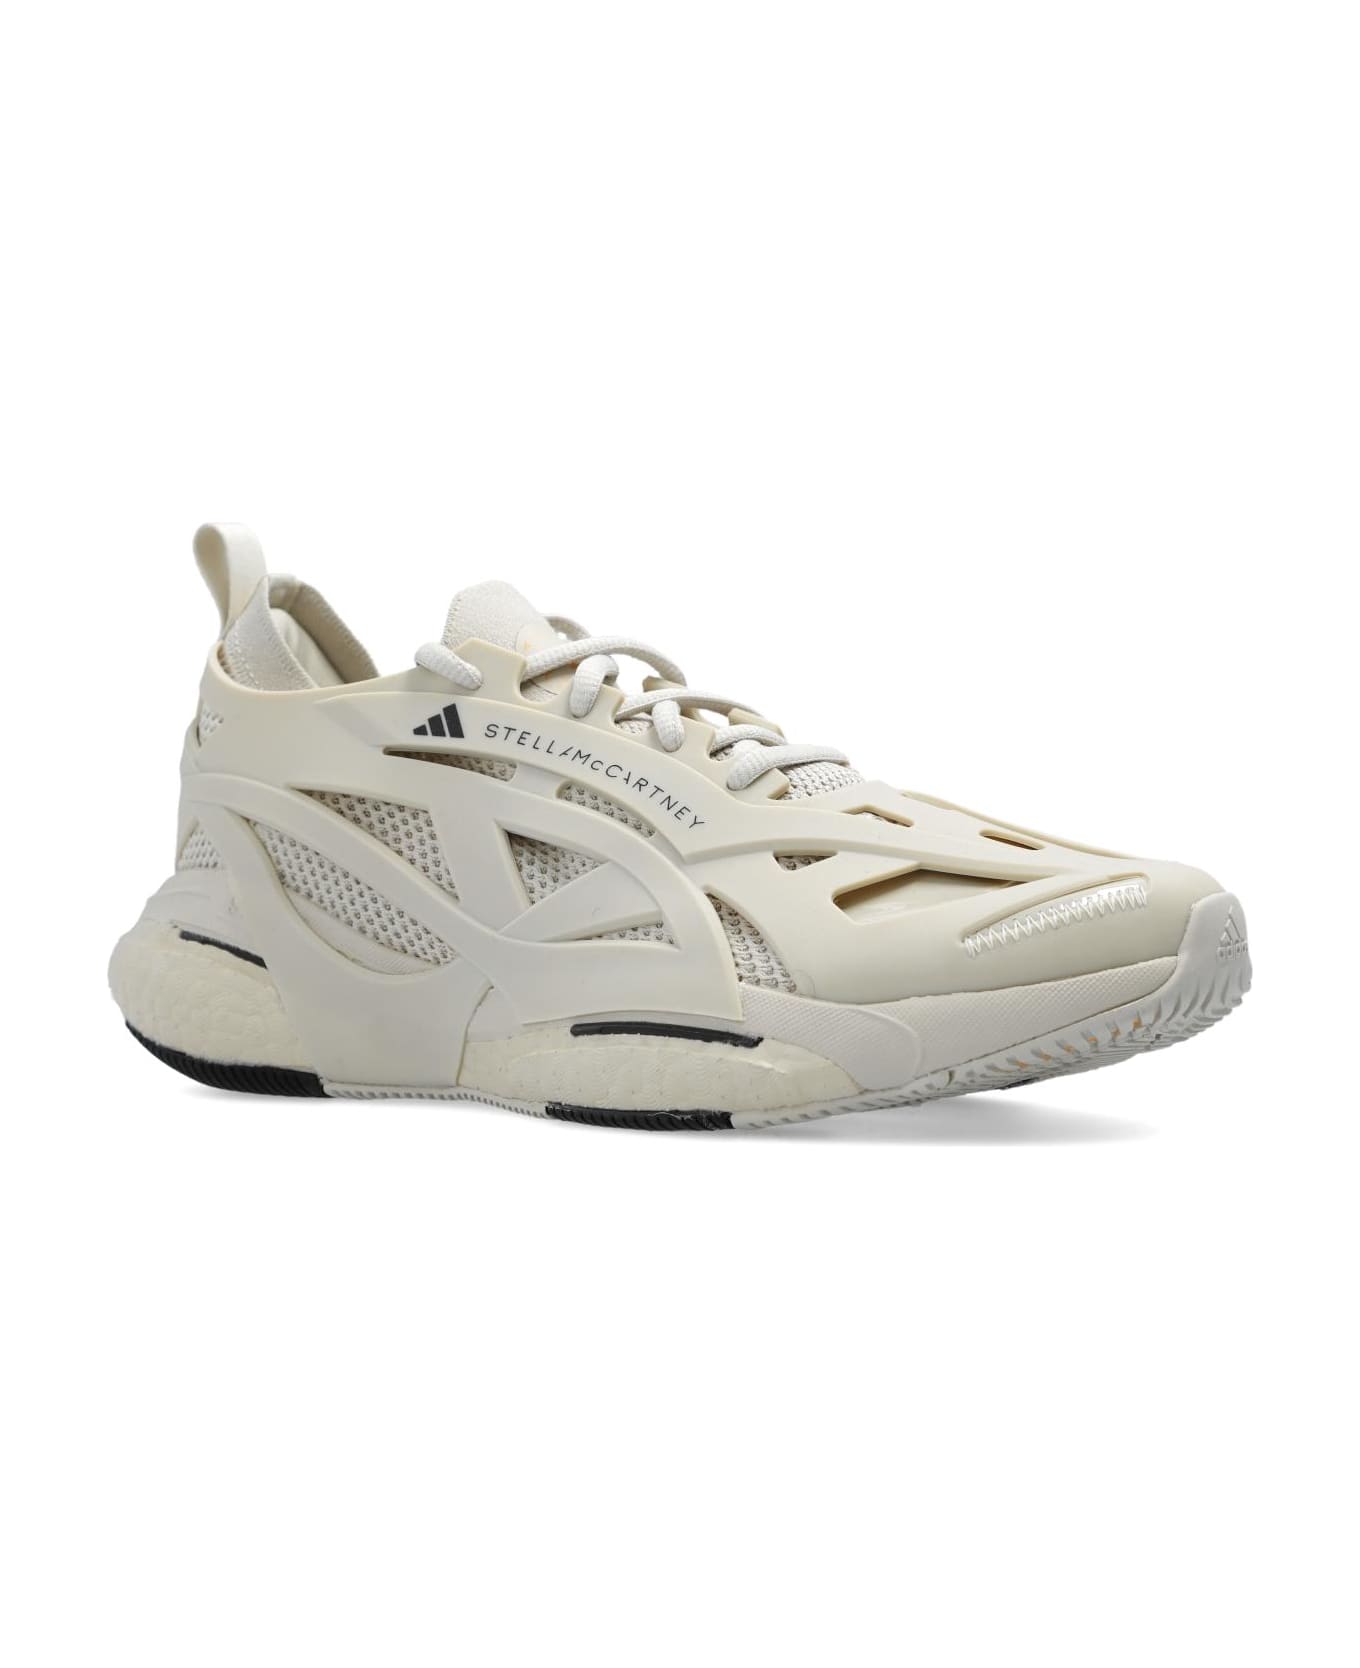 Adidas by Stella McCartney 'solarglide' Sneakers スニーカー